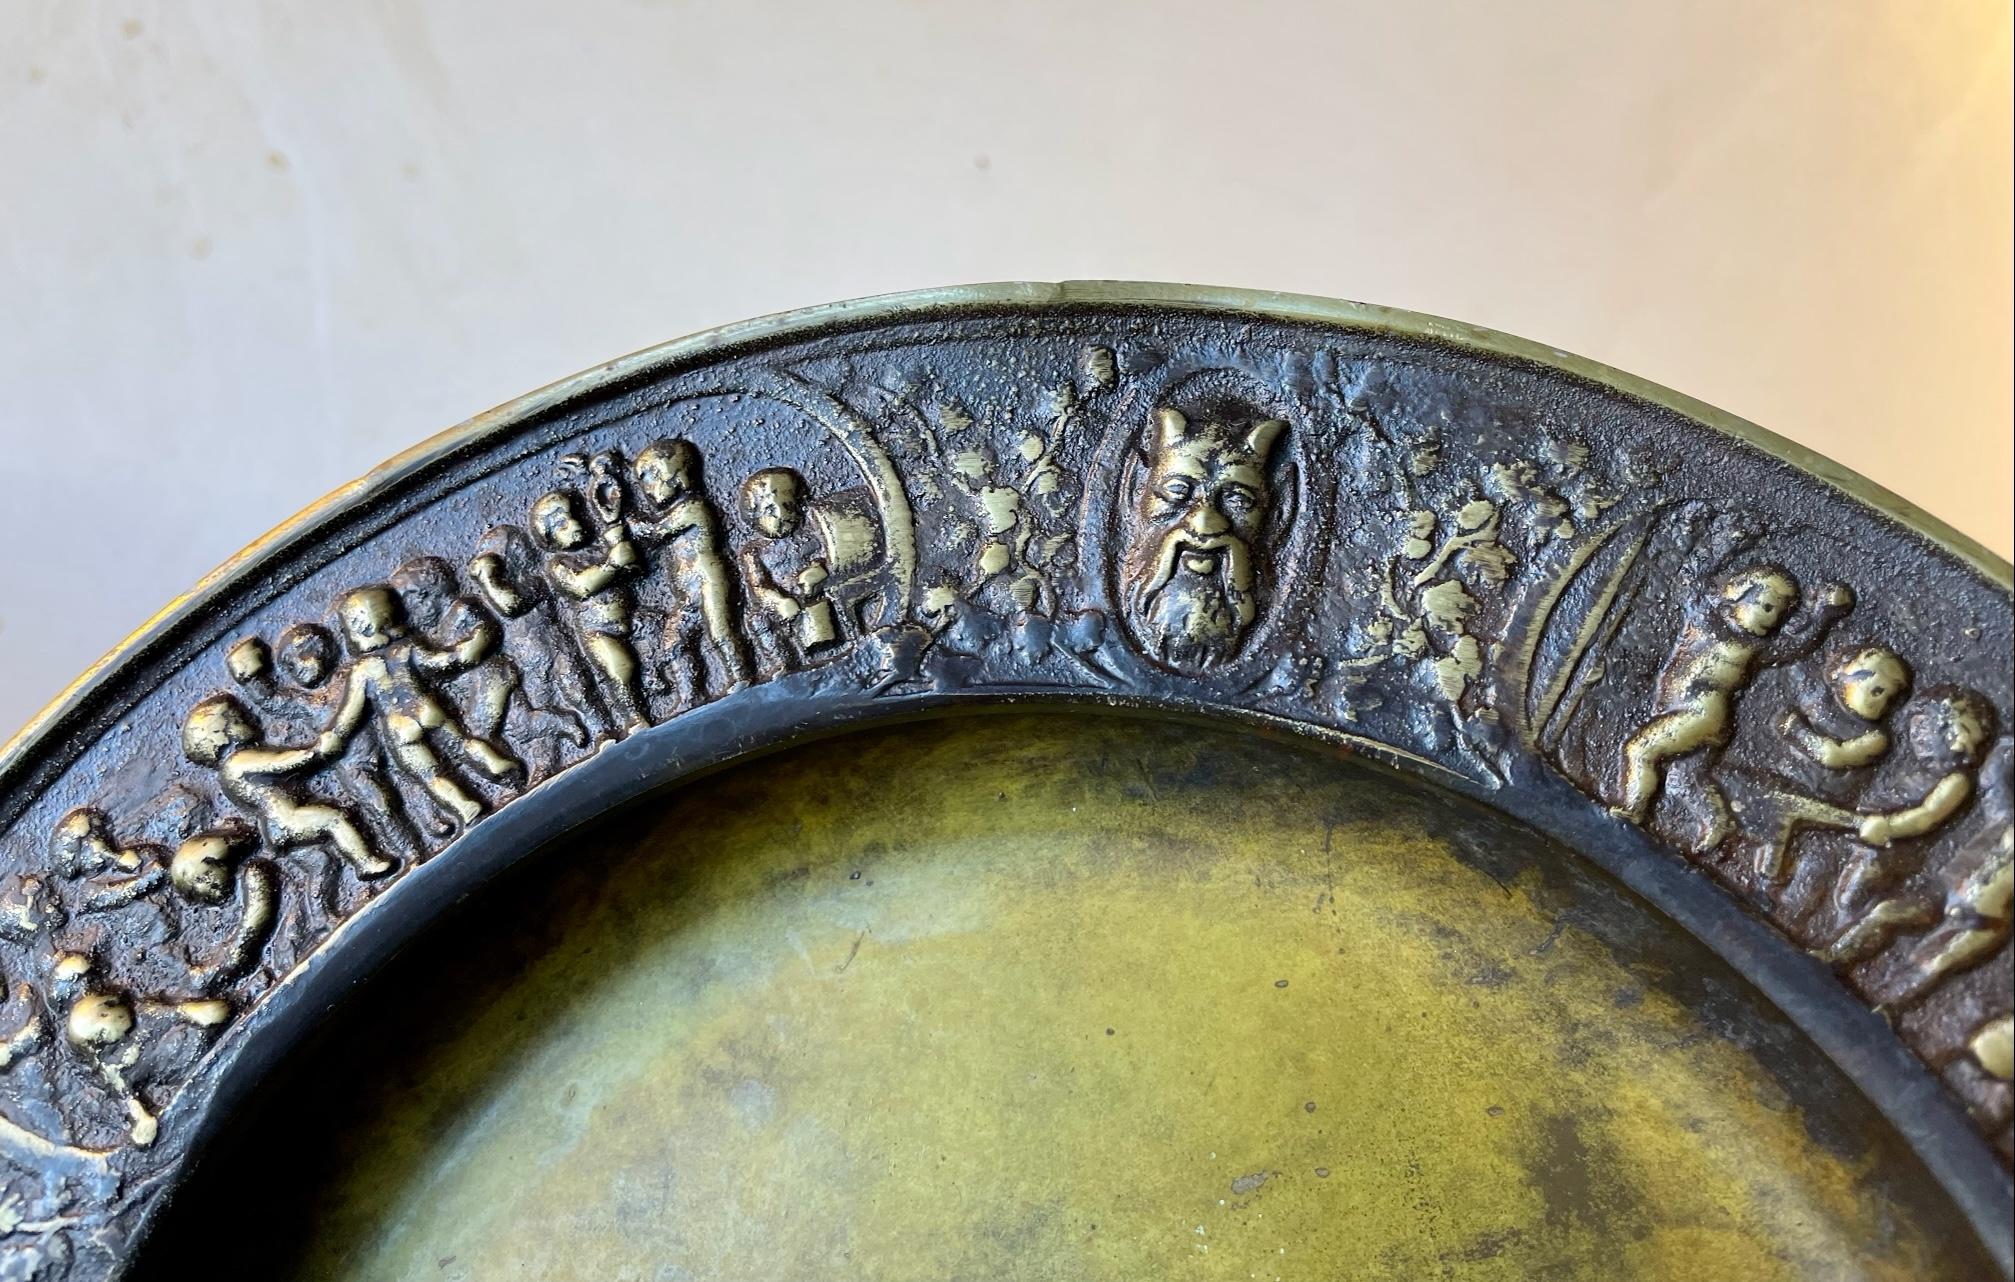 Unusual Cast bronze dish with green verdigris patina. It features scenes from the old testement with depictions of Lucifer - Satan cast in relief around its perimeter. Signed to its back: Memories from Sepstrup in Danish. Sepstrup is a small town in